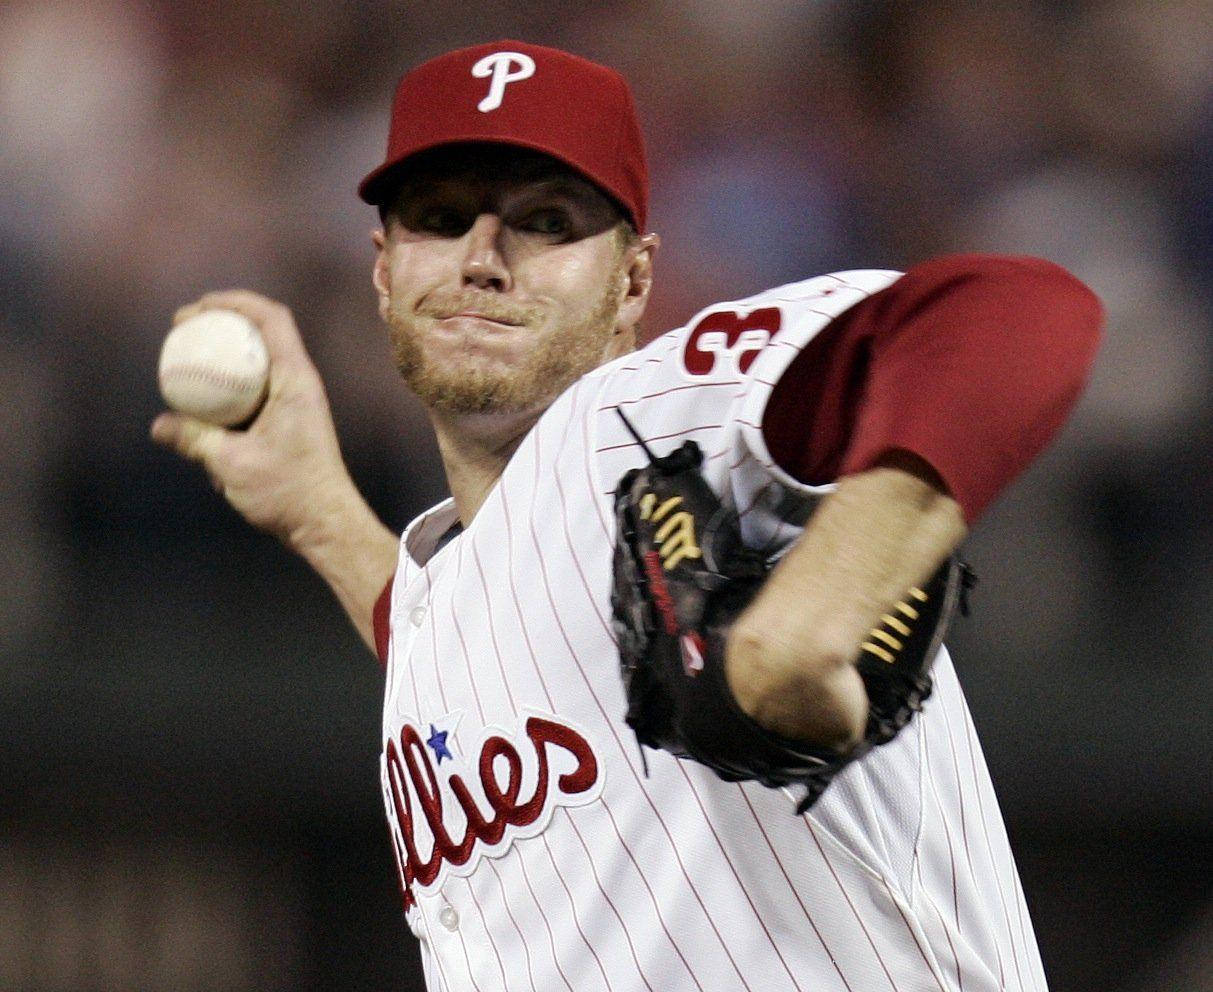 Roy Halladay Focused While Throwing Baseball Wallpaper